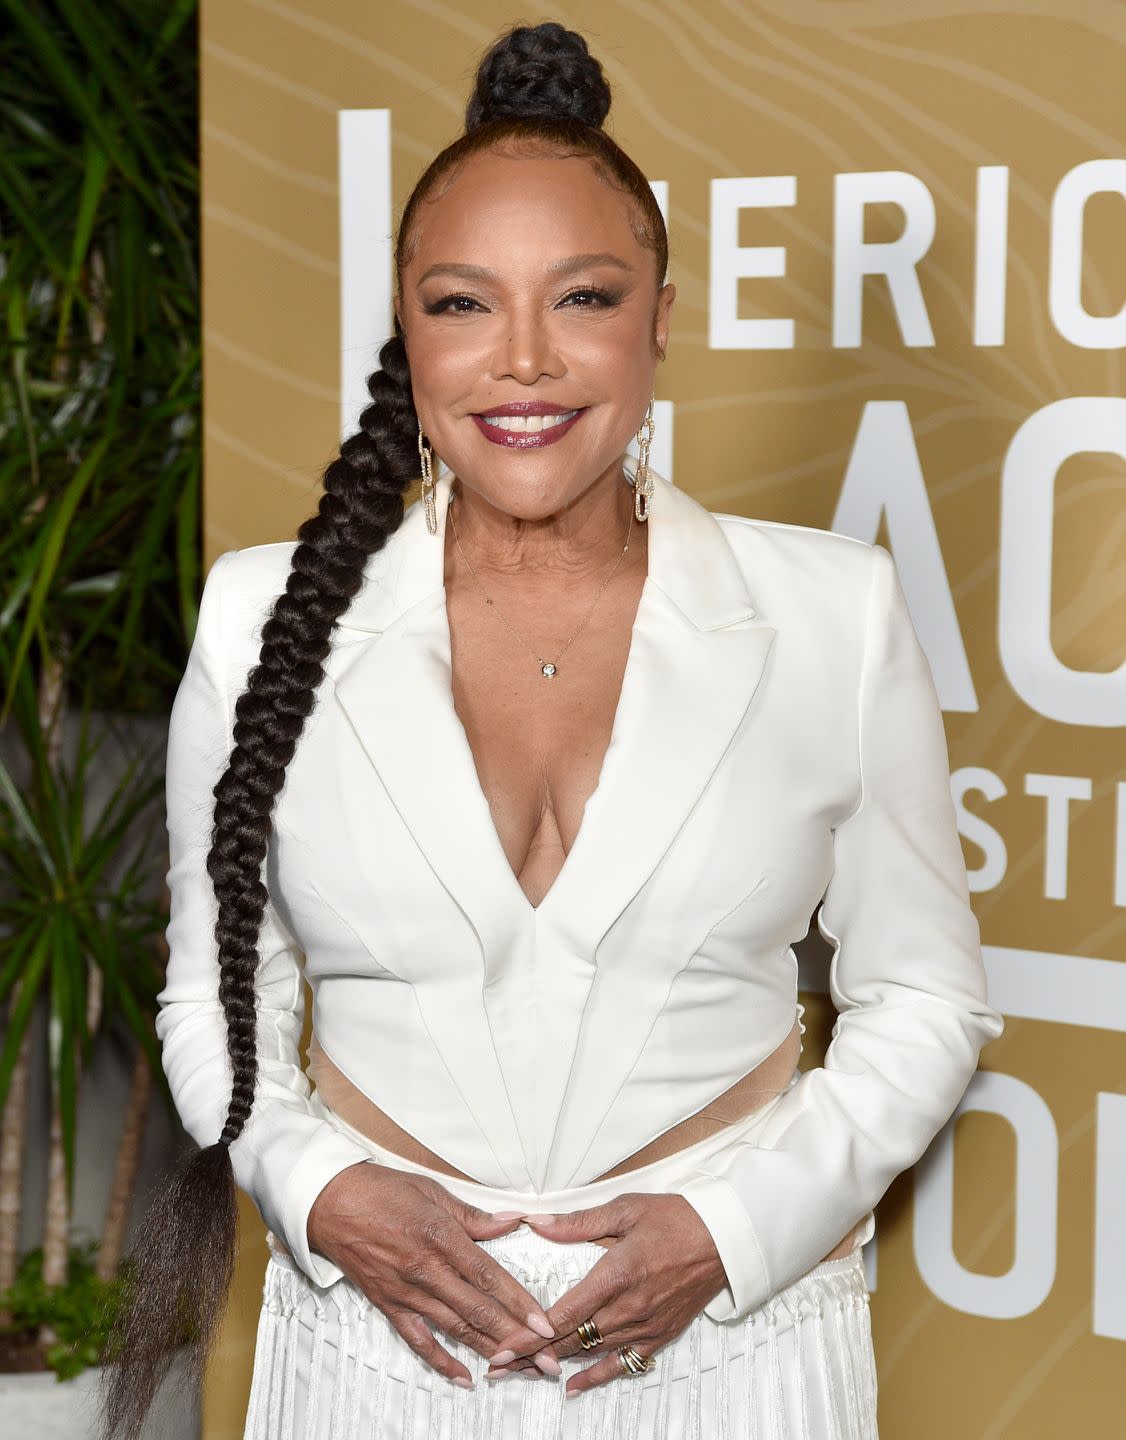 lynn whitfield, a woman stands looking at the camera and smiling, she wears her long black hair in a braid and a white suit top and trousers